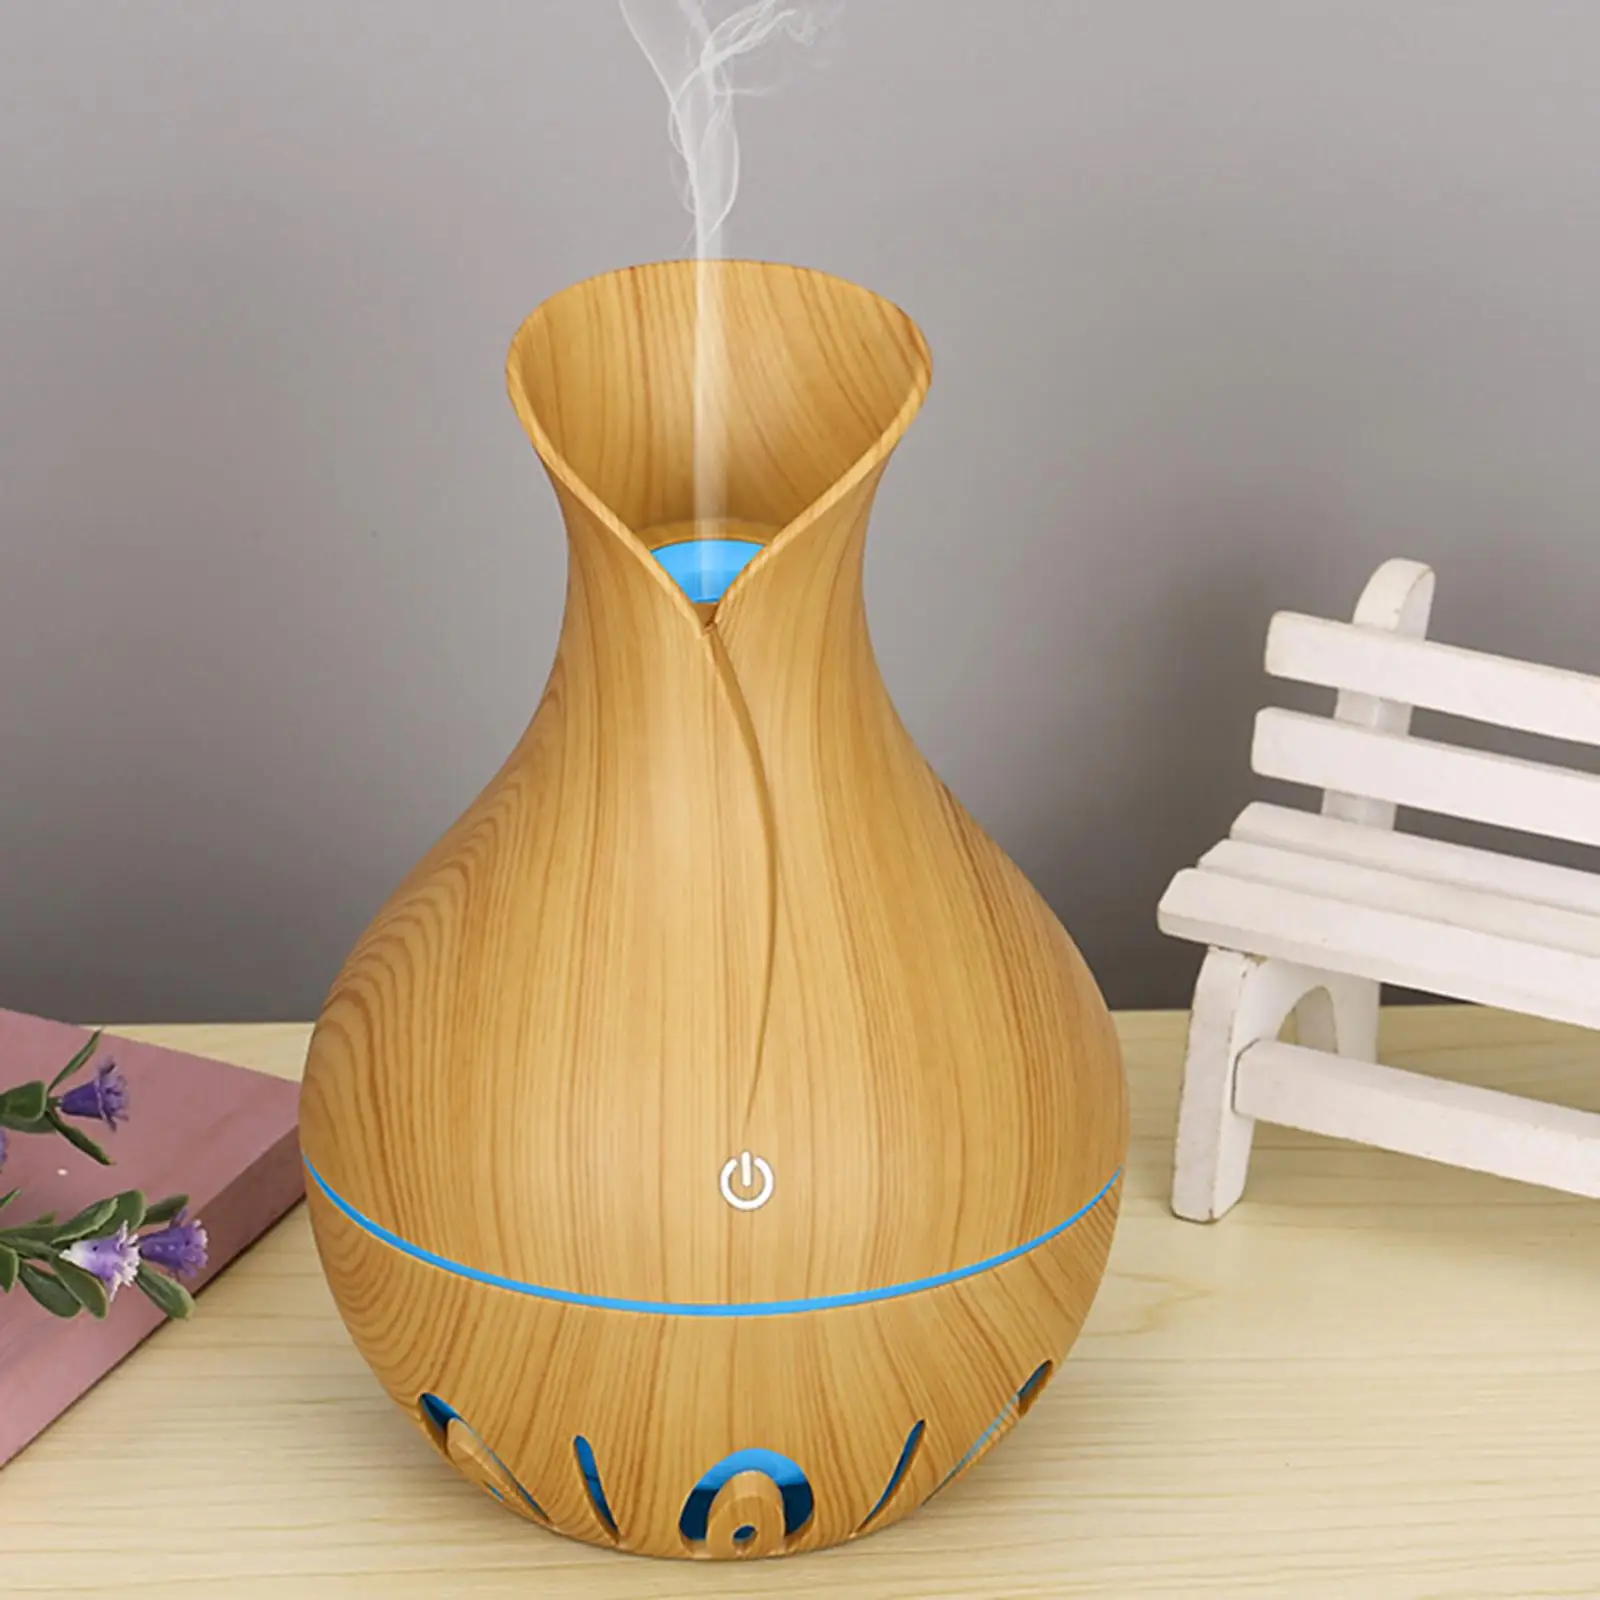 Portable Essential Oil Diffuser Ultrasonic LED Lamp Purifier Cool Mist Aroma USB Whisper Mini Humidifier for Gifts Bedroom Car